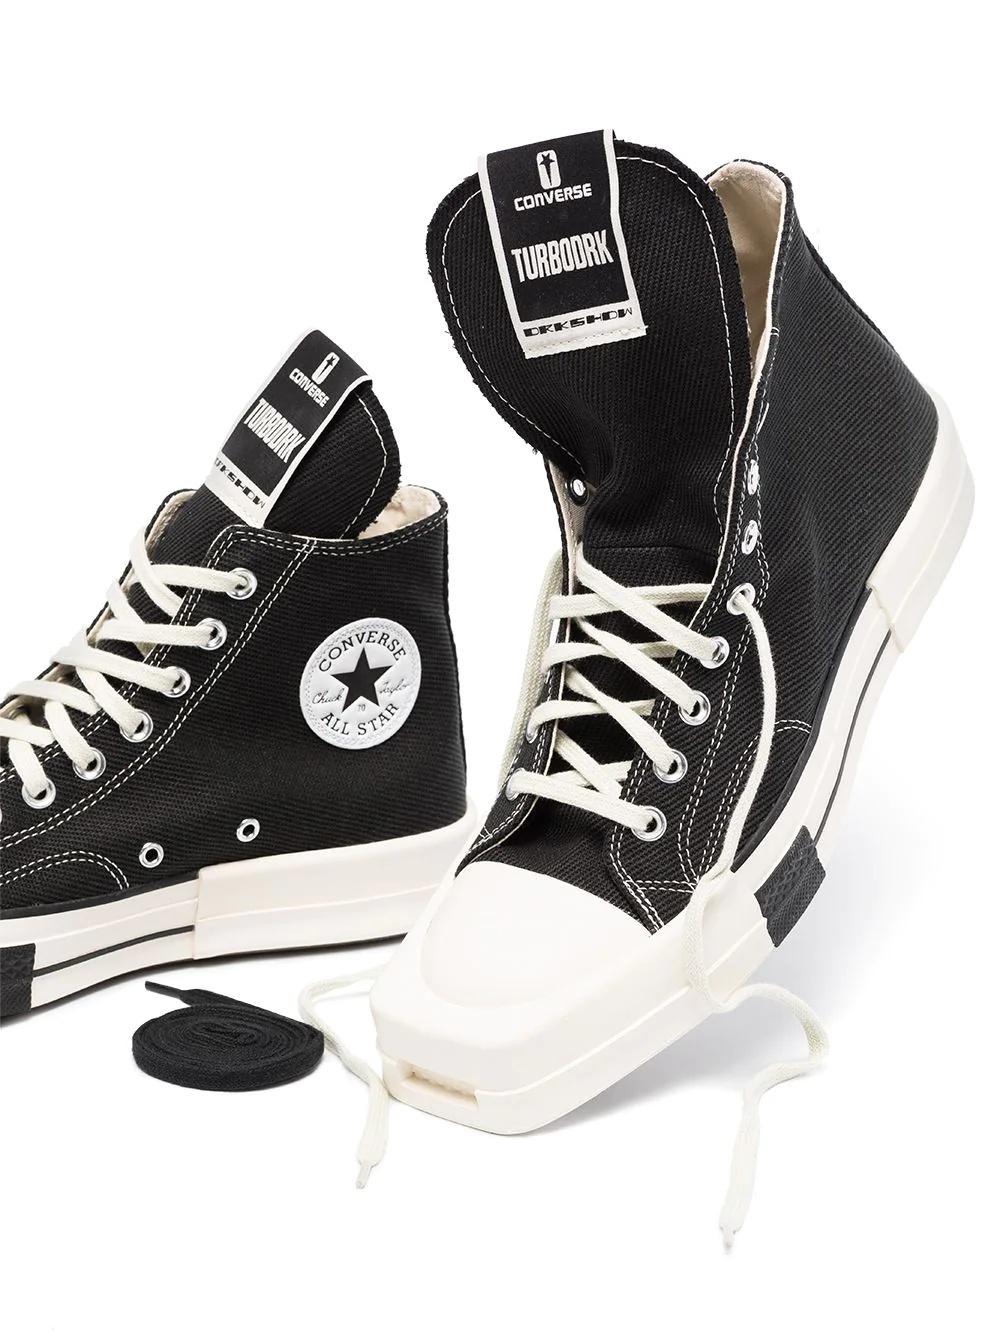 x Converse TURBODRK square-toe high-top sneakers - 2